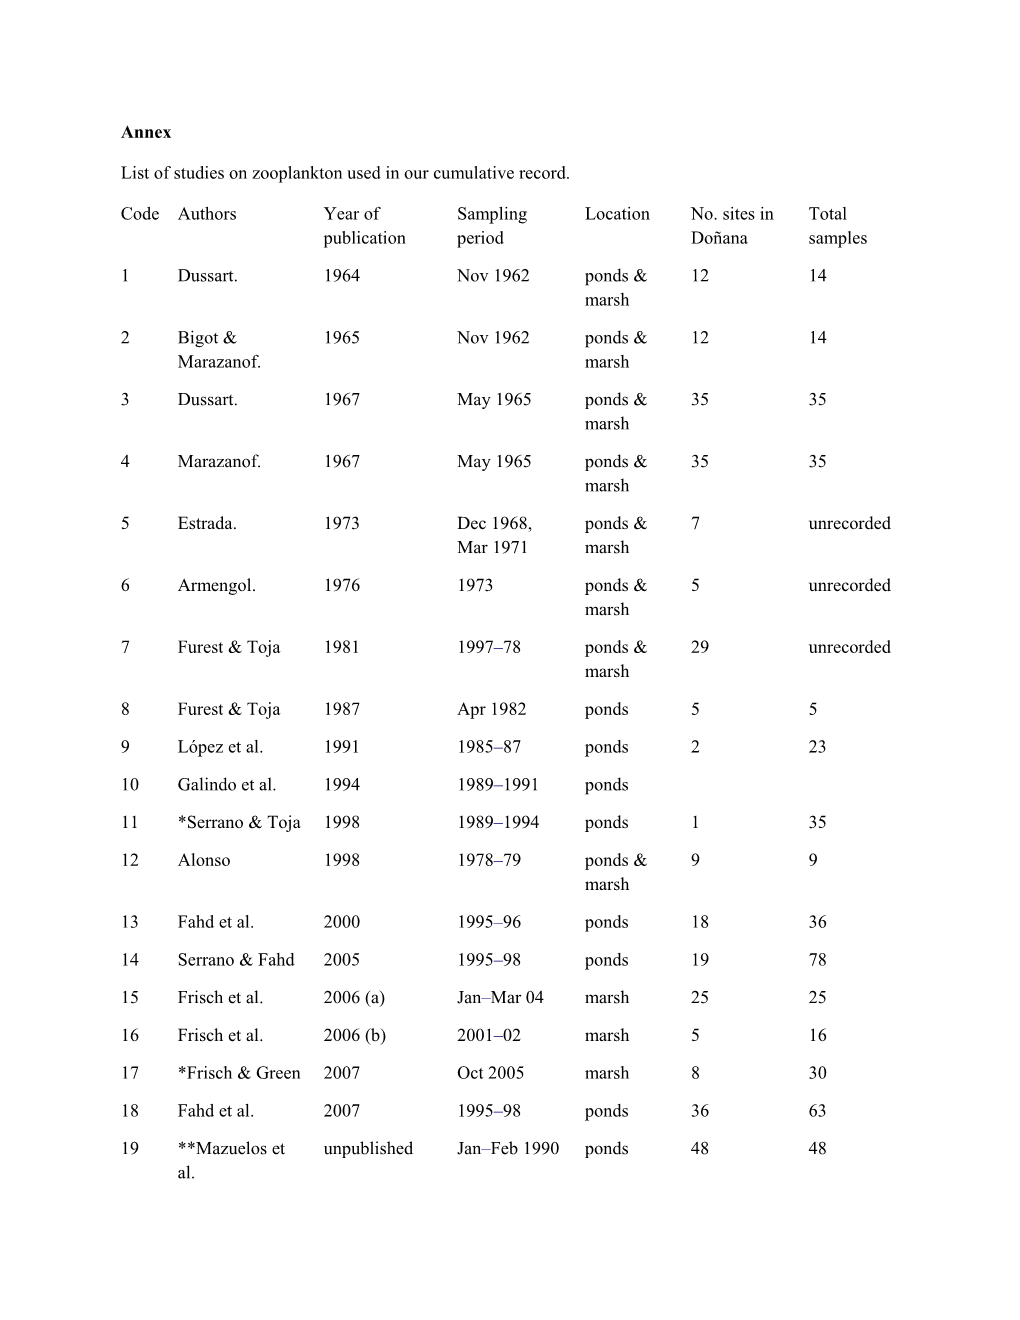 List of Studies on Zooplankton Used in Our Cumulative Record